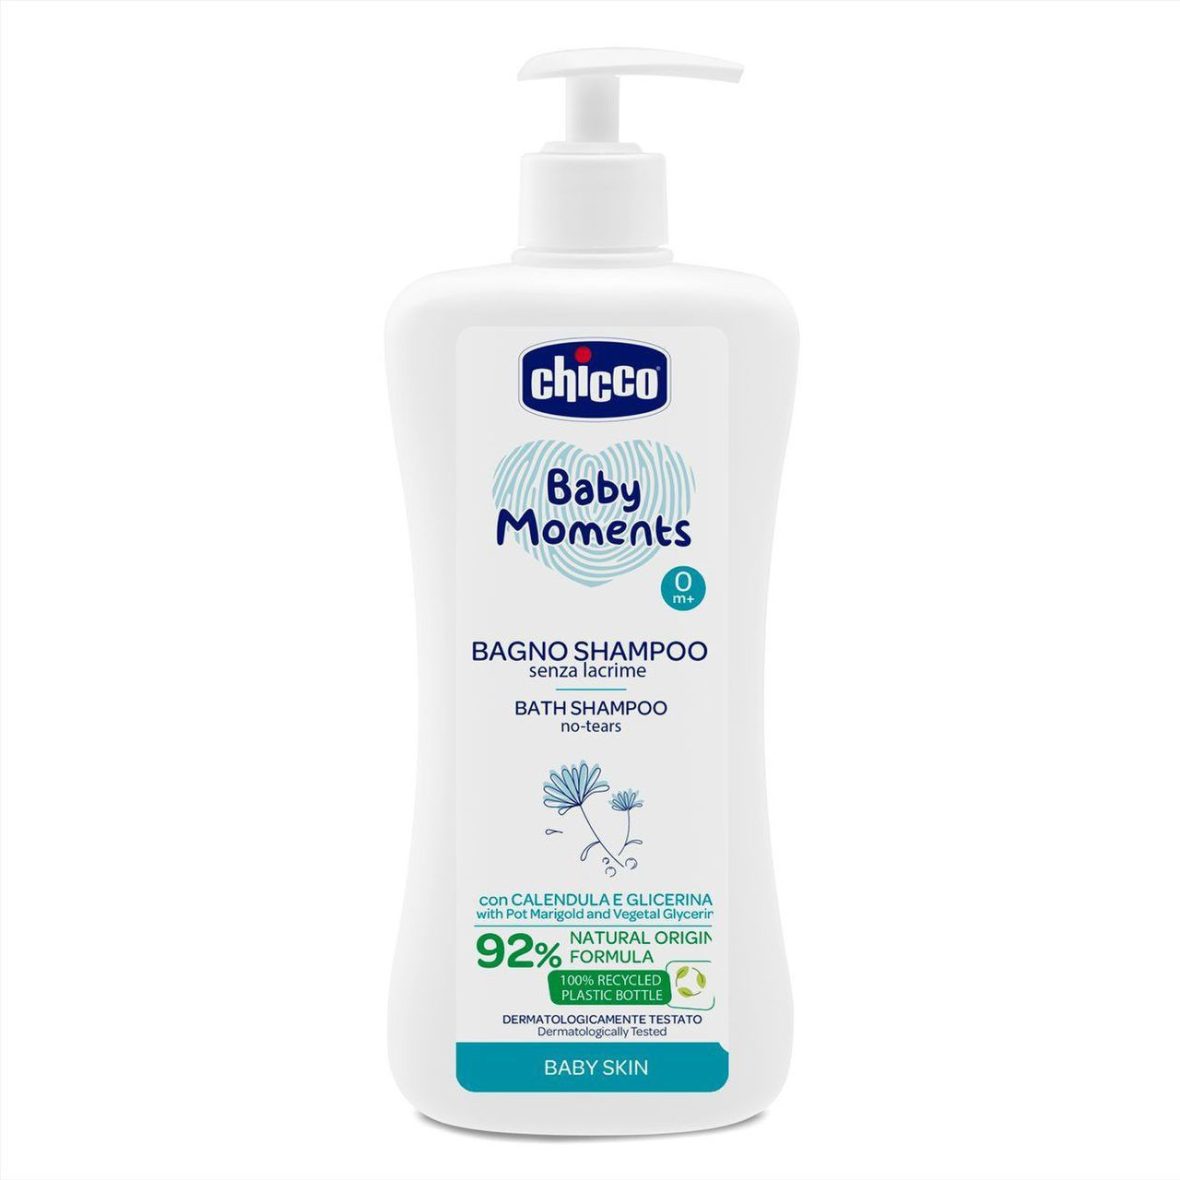 Chicco New Baby Moments 750ml Aφρολουτρο Σαμπουάν